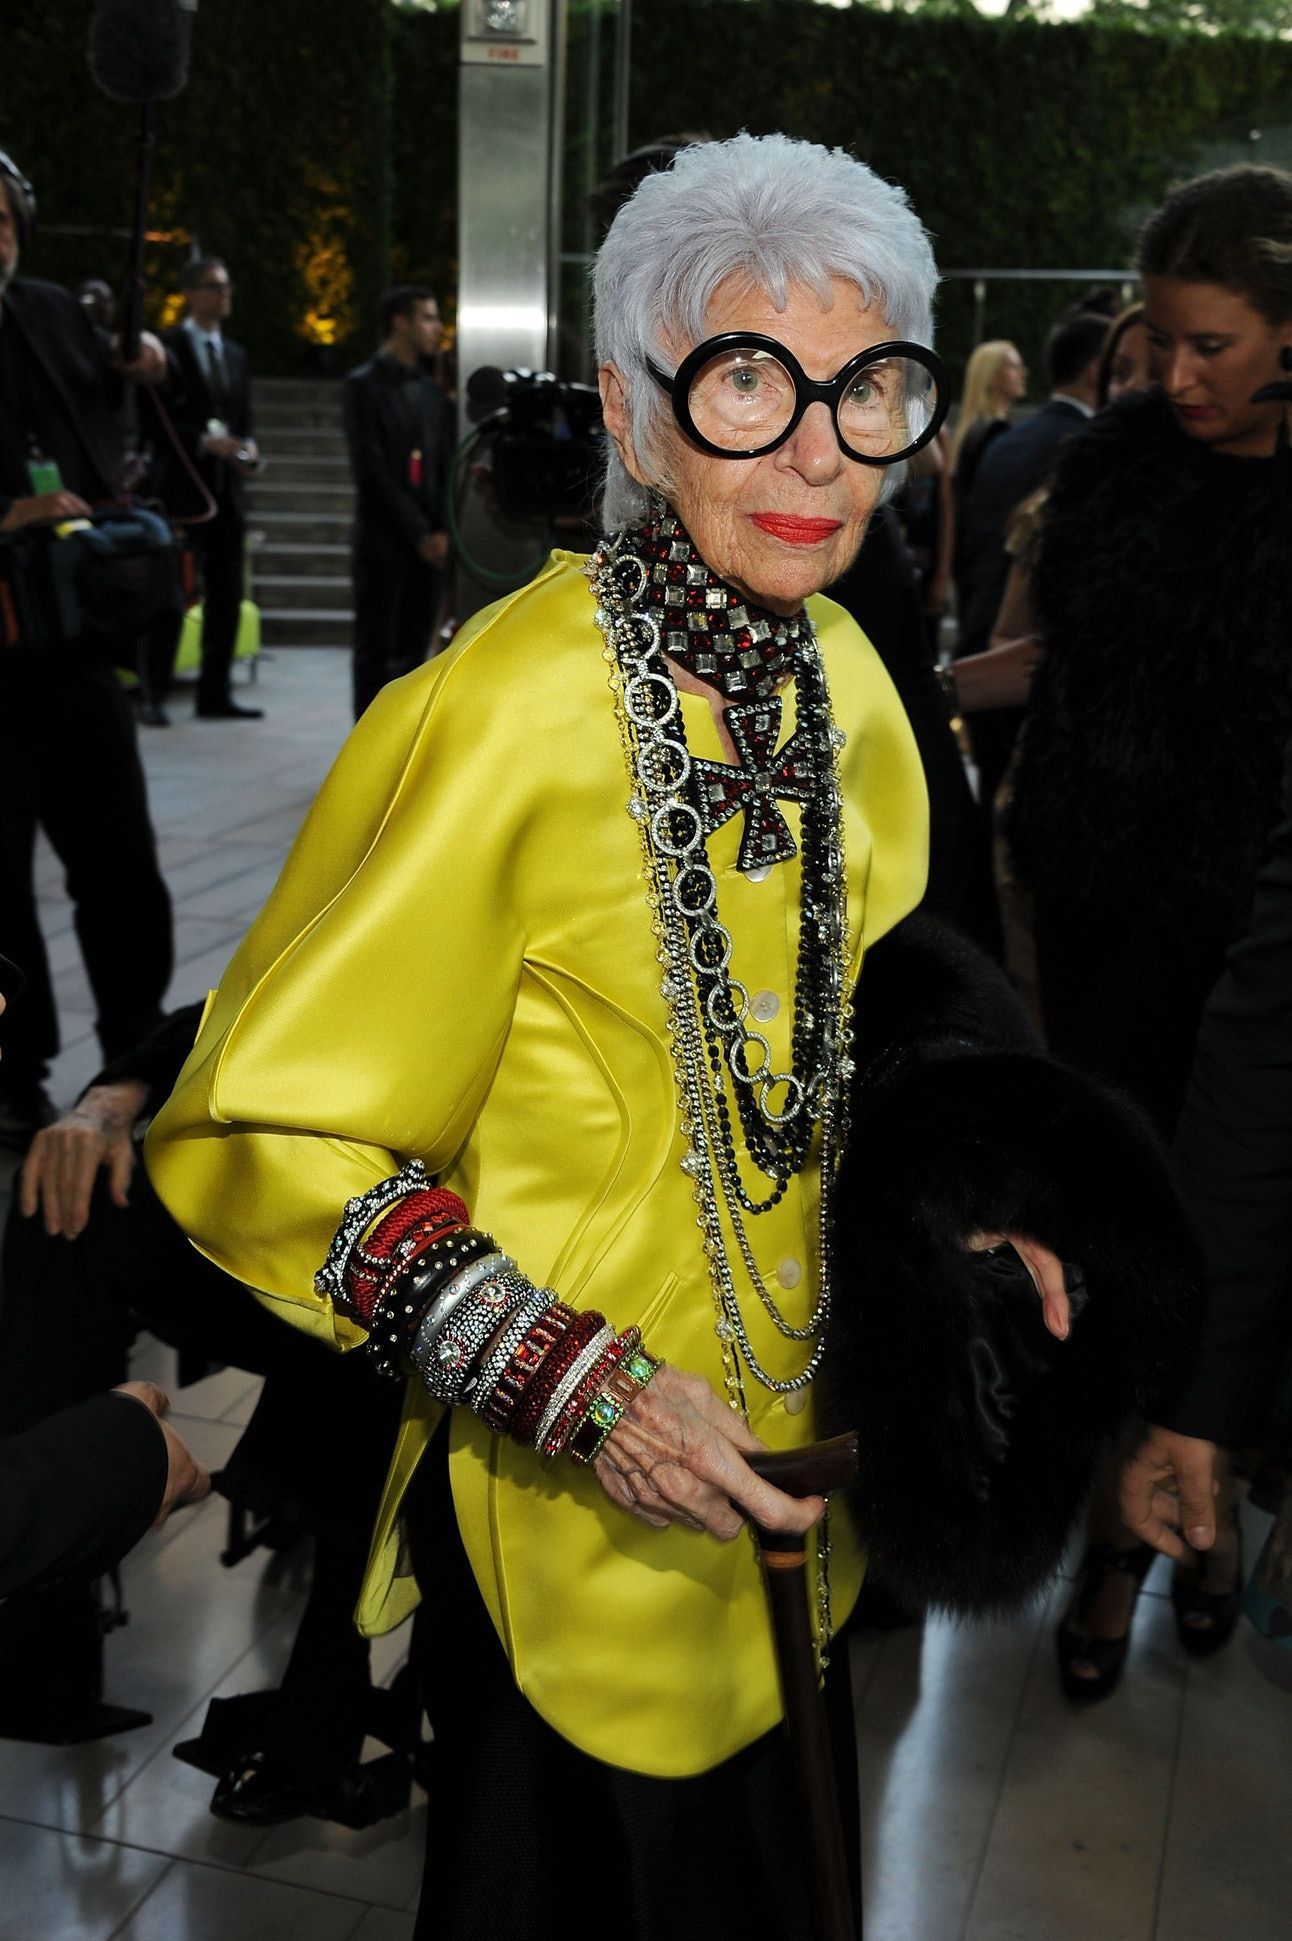 15 Iris Apfel Quotes About Personal Style & Finding Yourself Through It -   style Icons eccentric